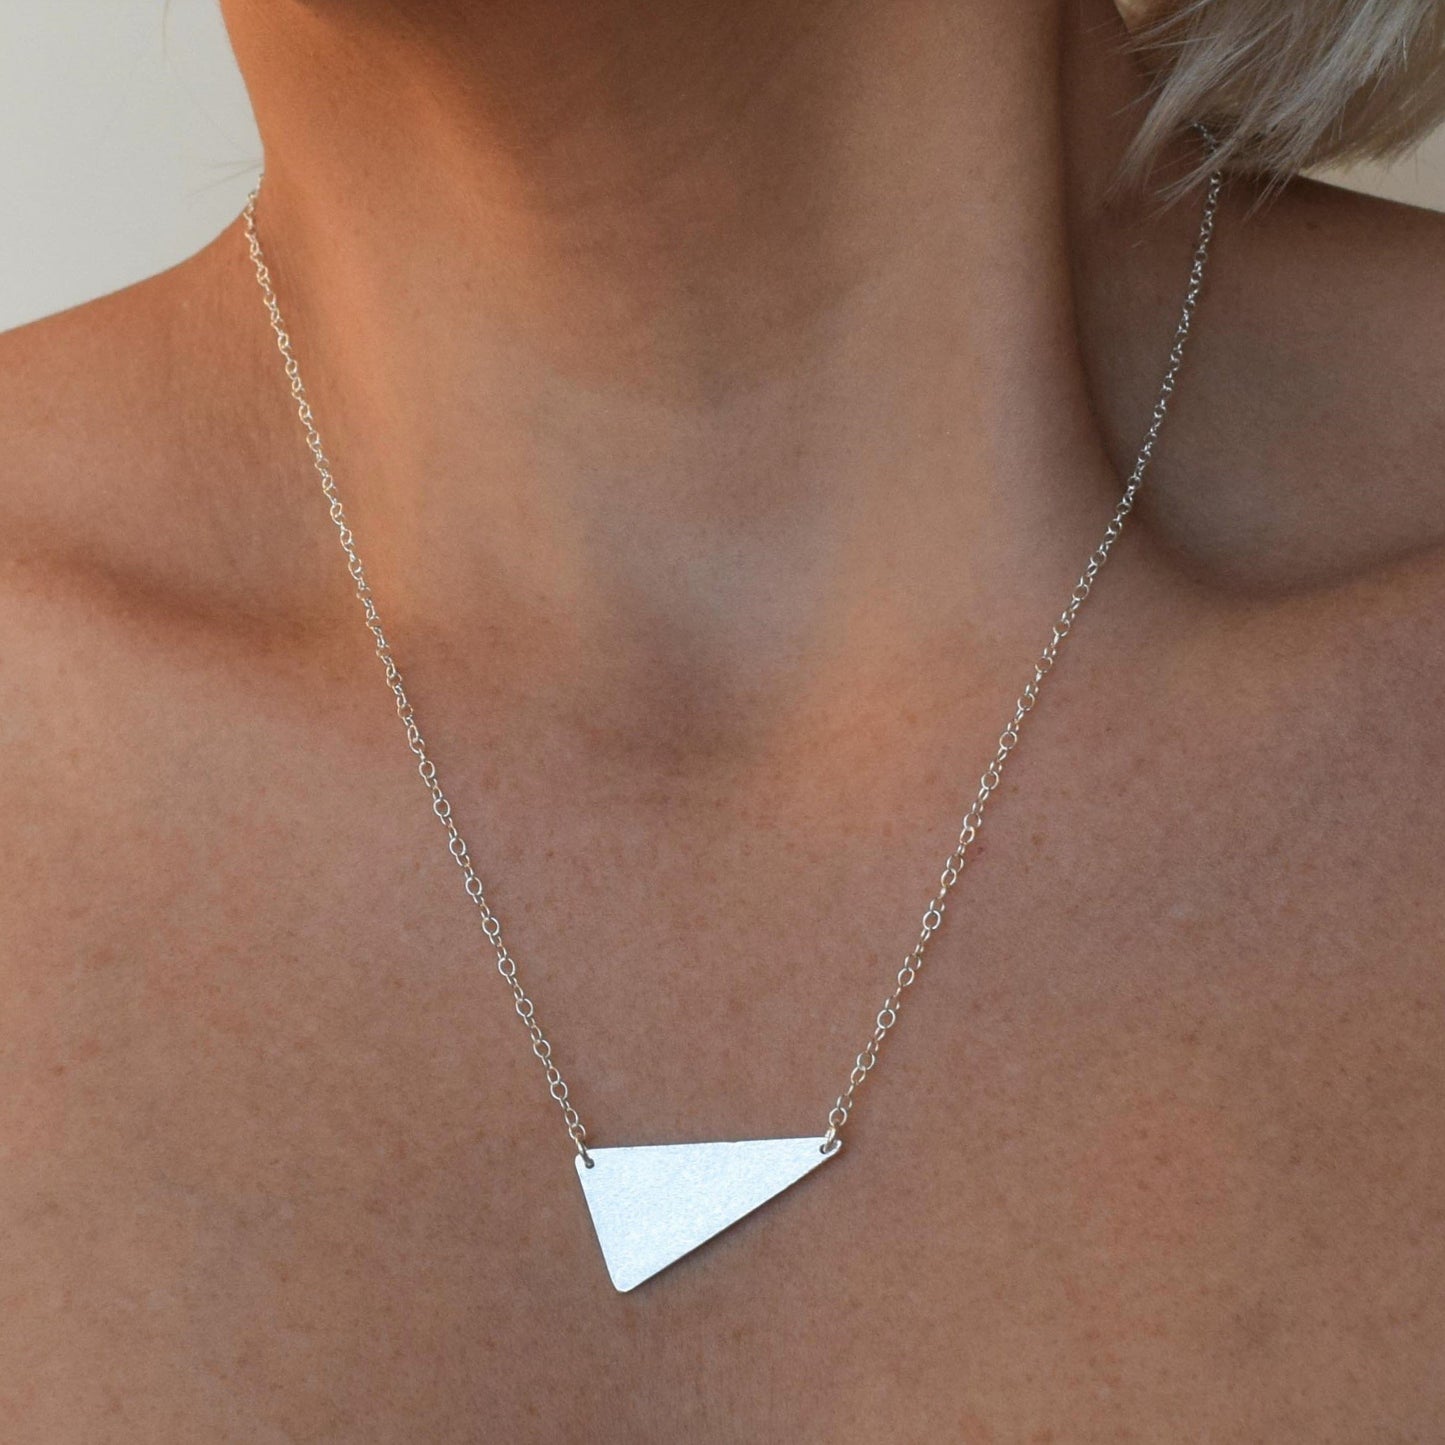 Geometric triangle necklace in sterling silver handmade by muka studio